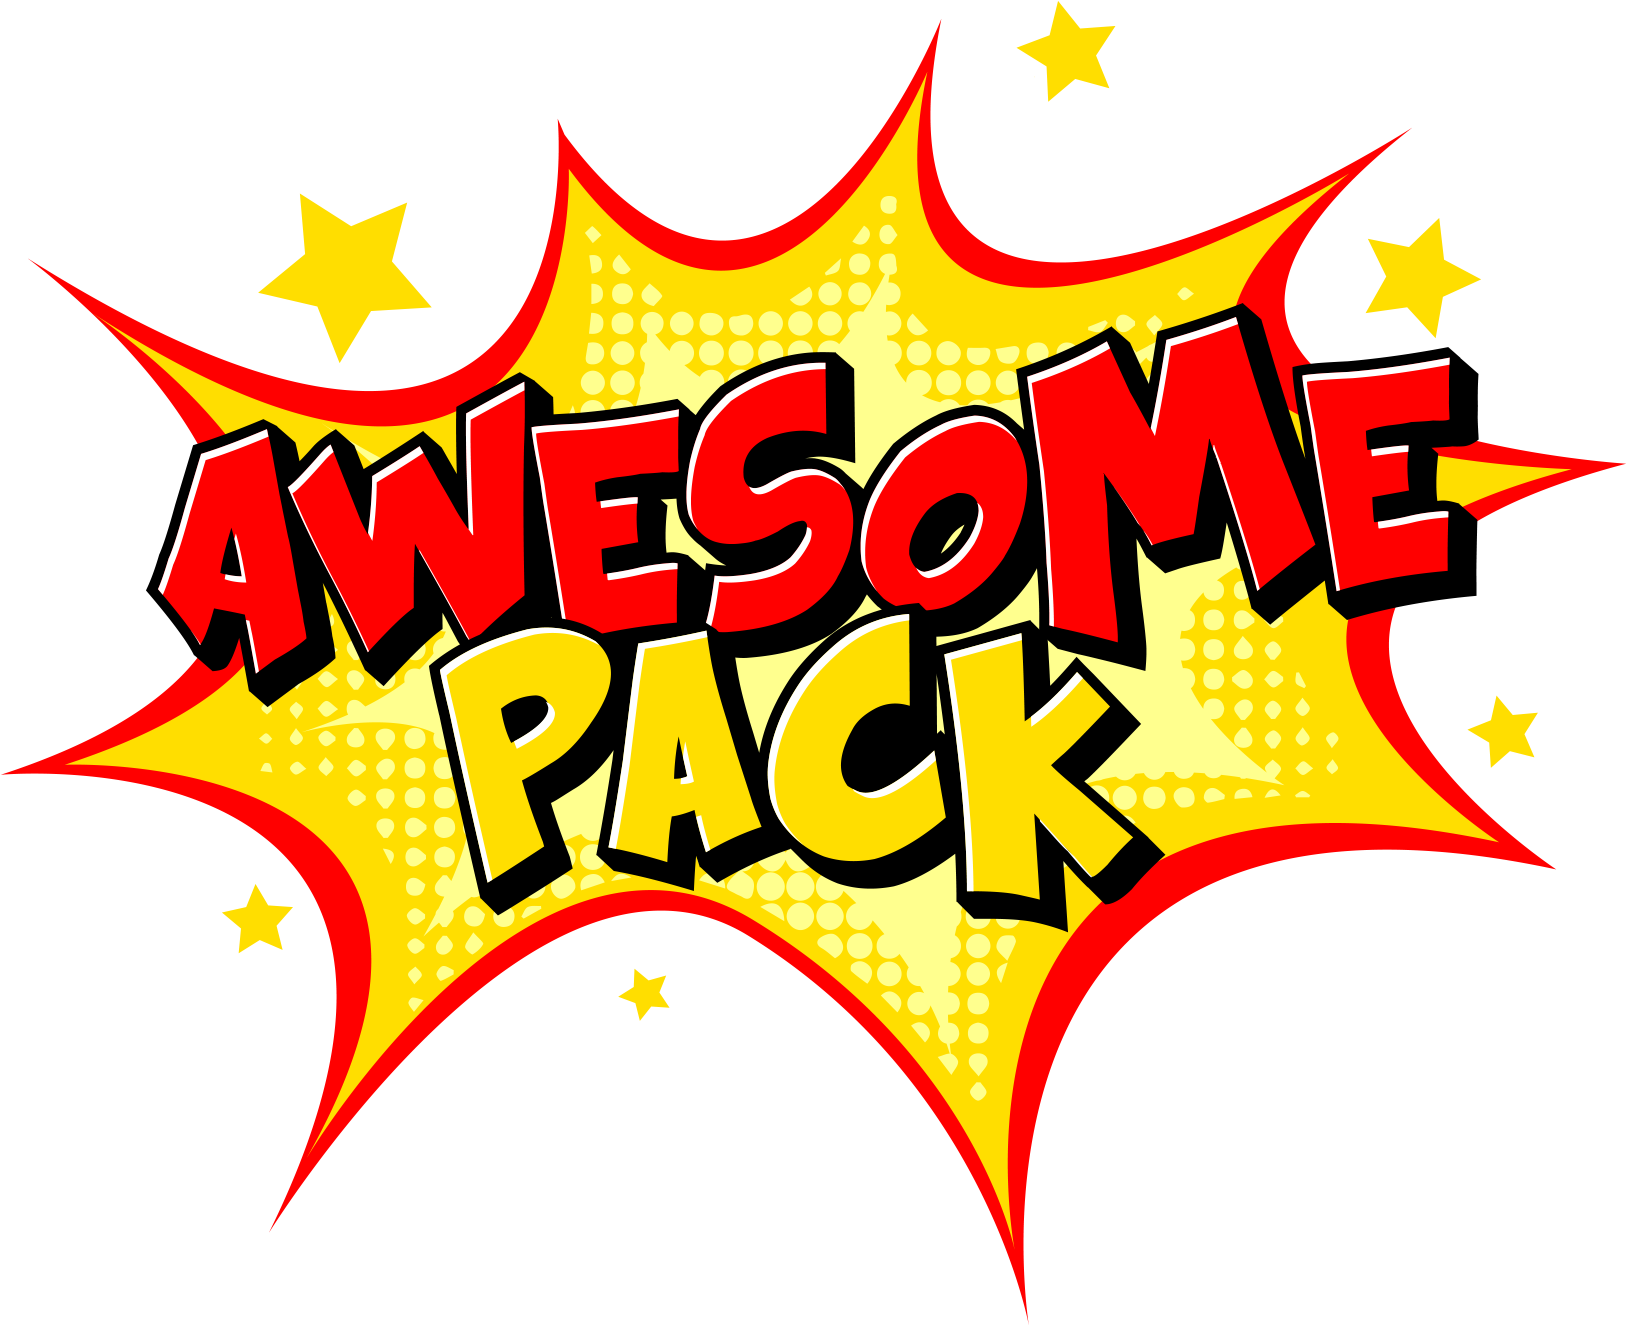 Awesome Pack Help Center Home Page - Subscription Box (1657x1355)